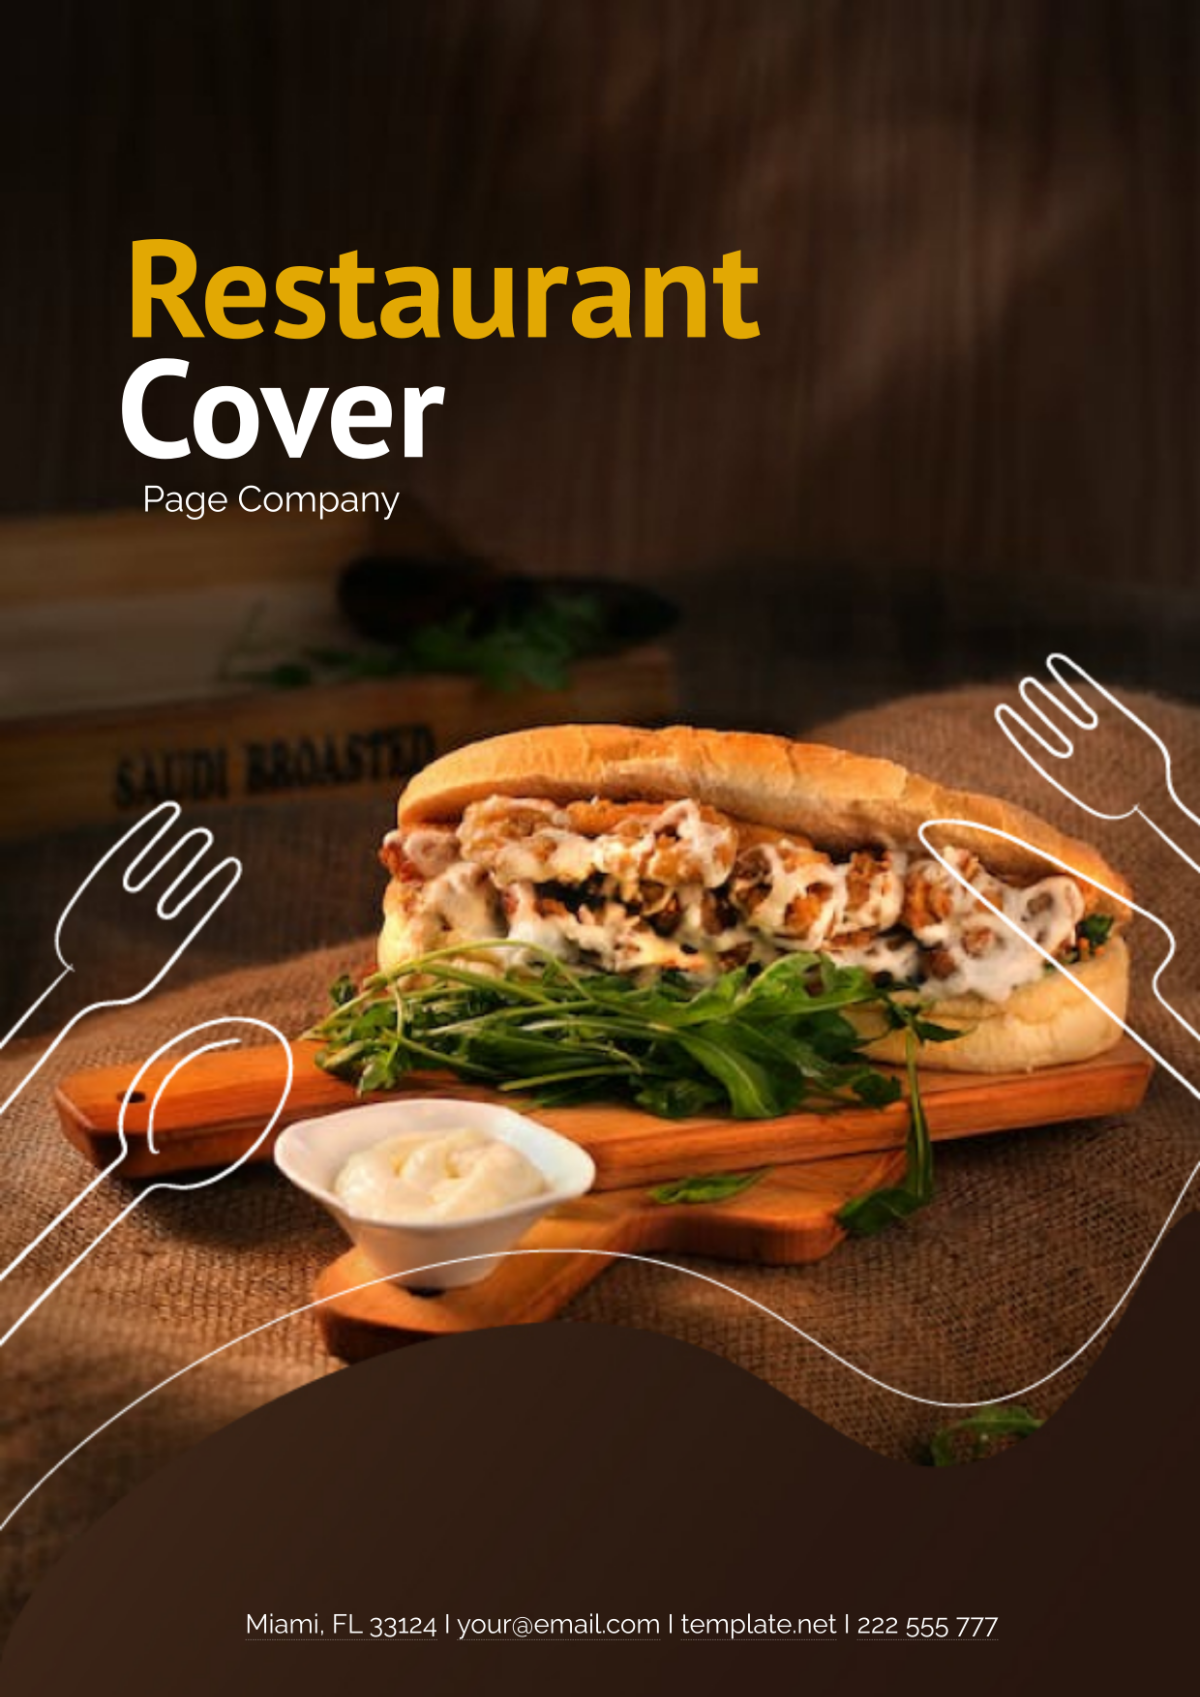 Restaurant Cover Page Company